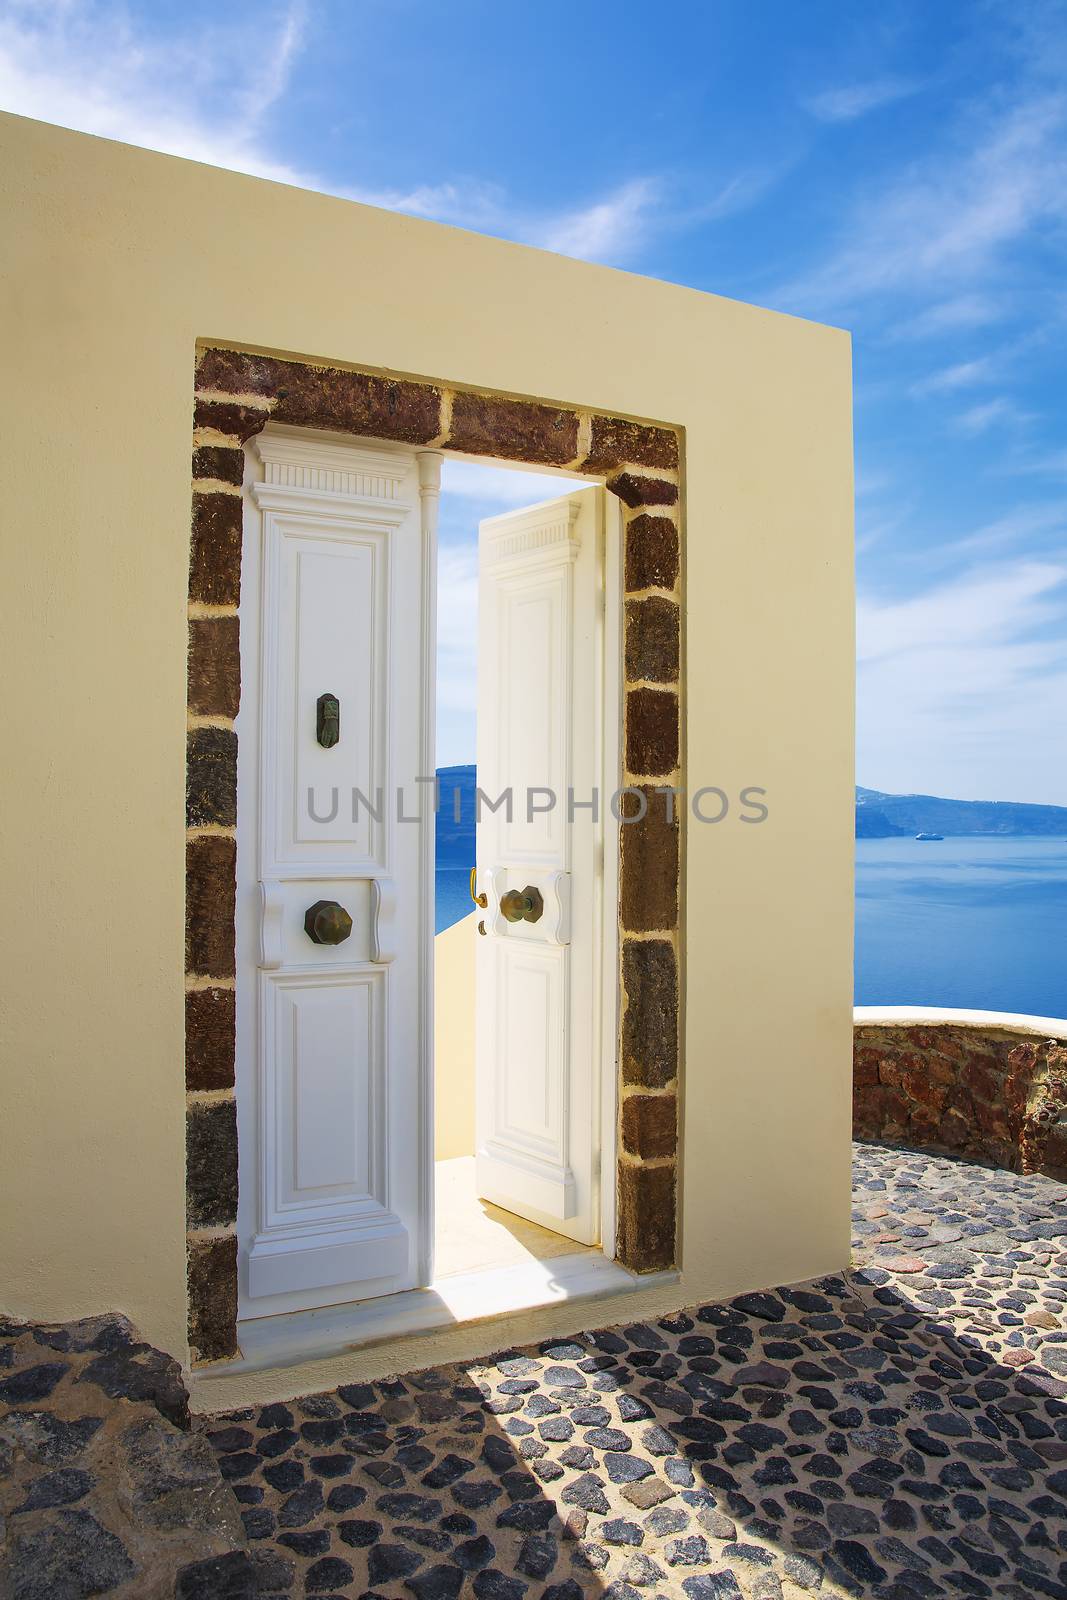 Sea view and architecture in Oia by vwalakte